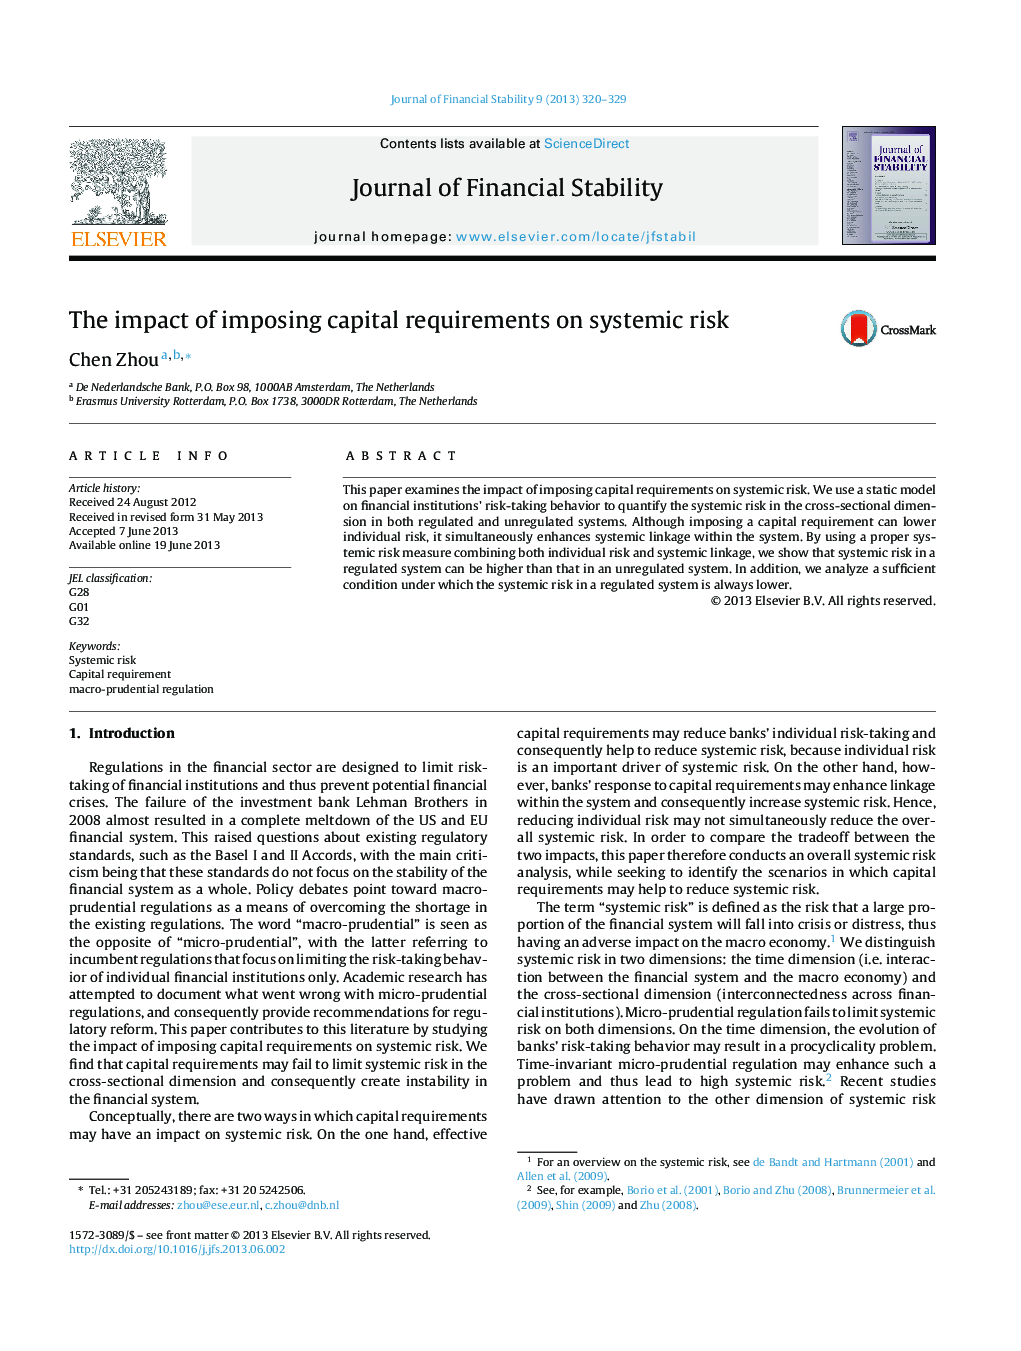 The impact of imposing capital requirements on systemic risk